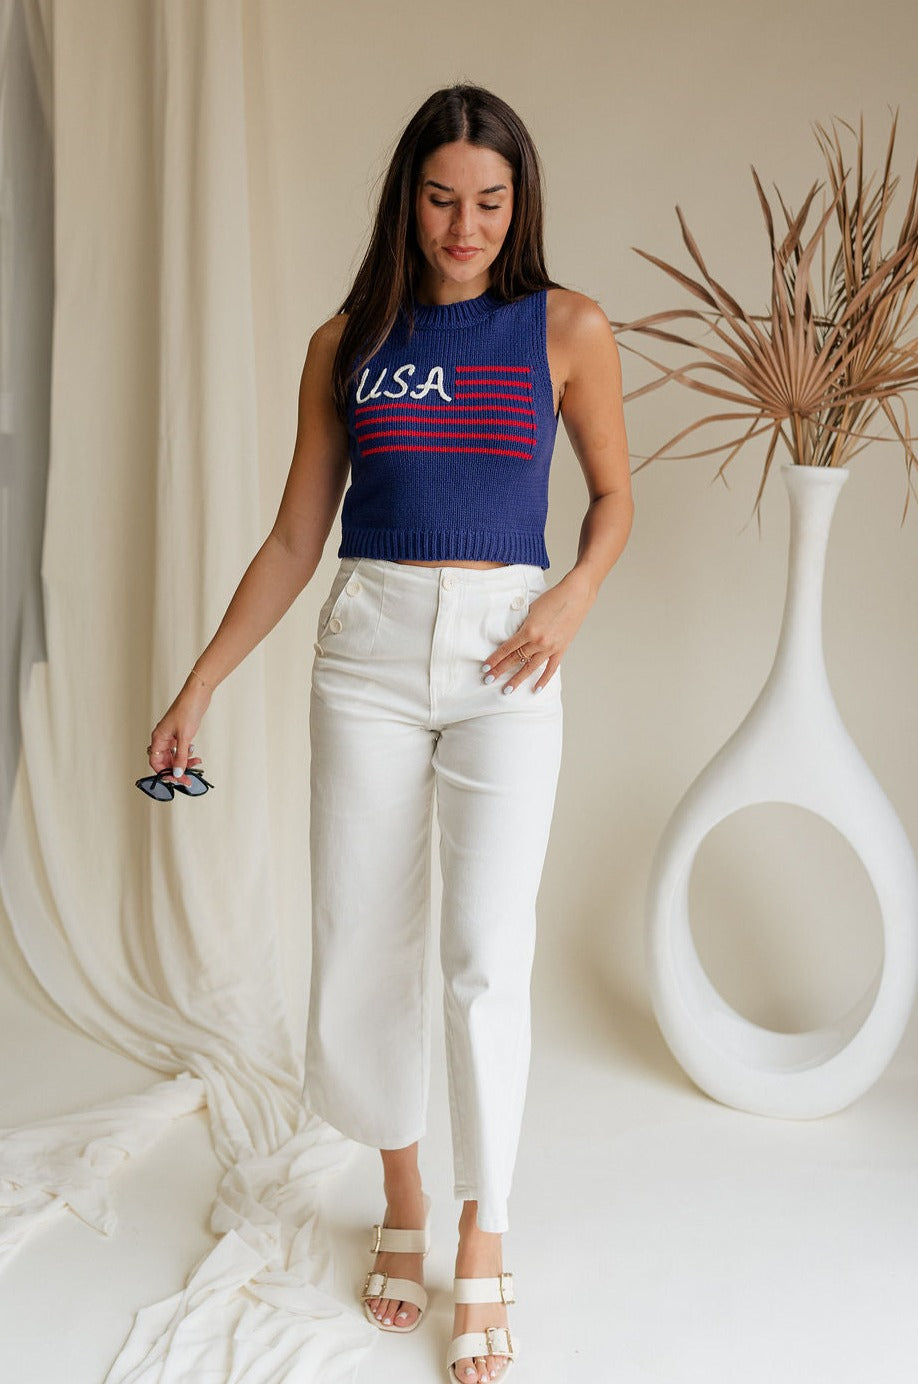 Full body front view of female model wearing the USA Navy Knit Flag Tank Top that has navy knit fabric, a stitched flag with red stripes and white USA text, and a round neck.